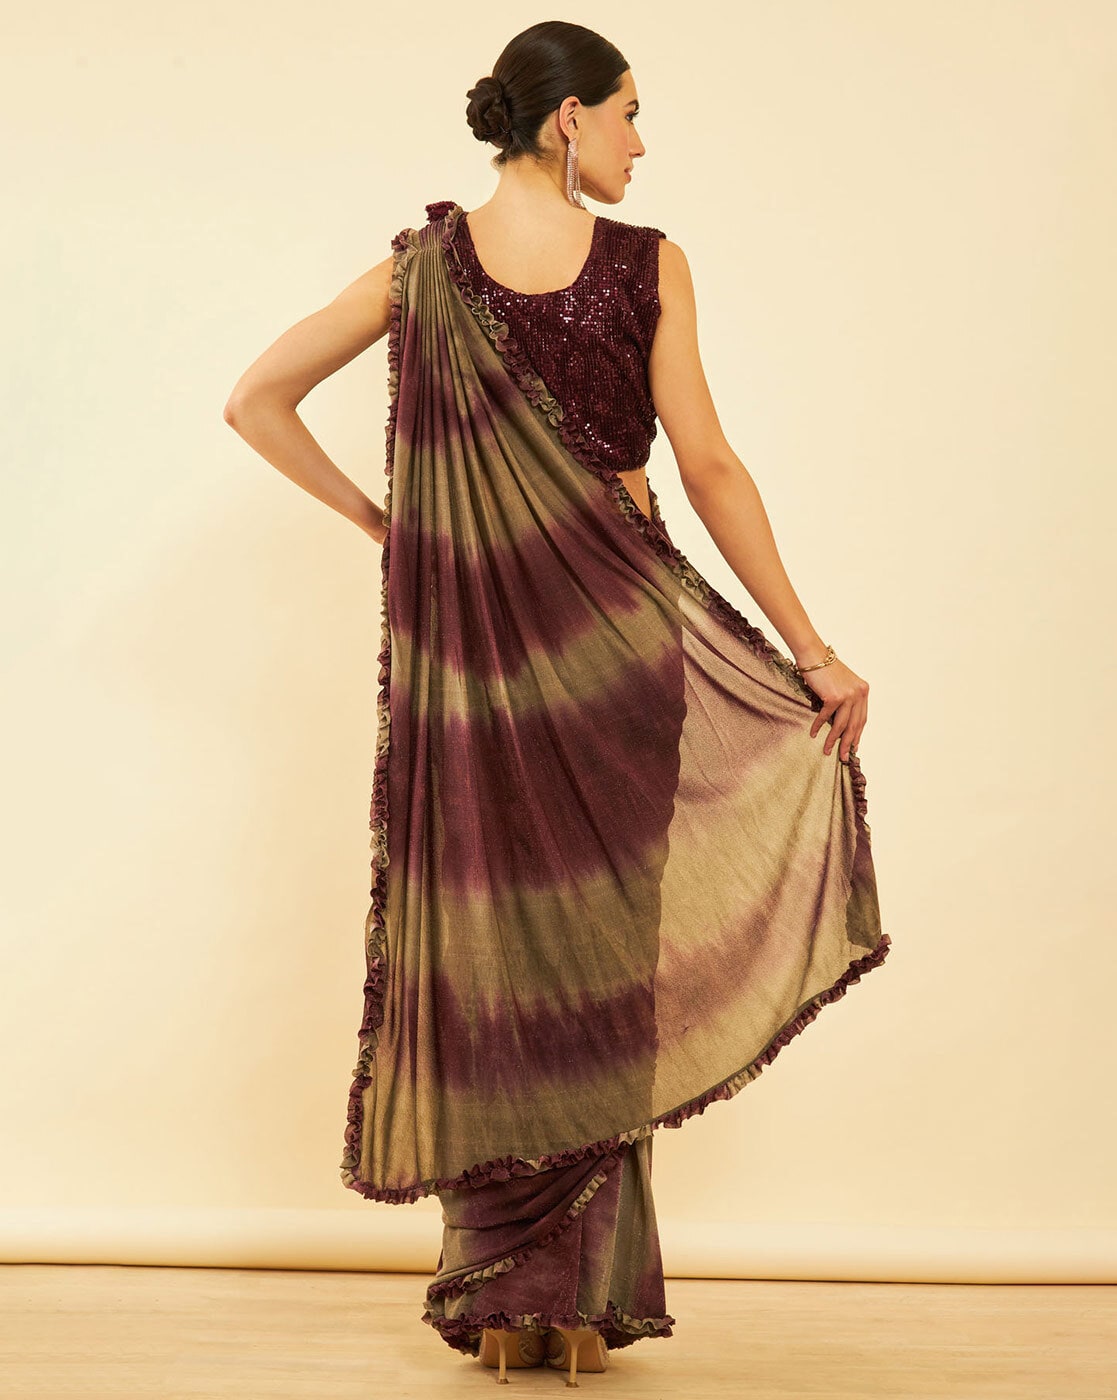 Women's Wine Hosiery Saree Shapers Collection at Soch India